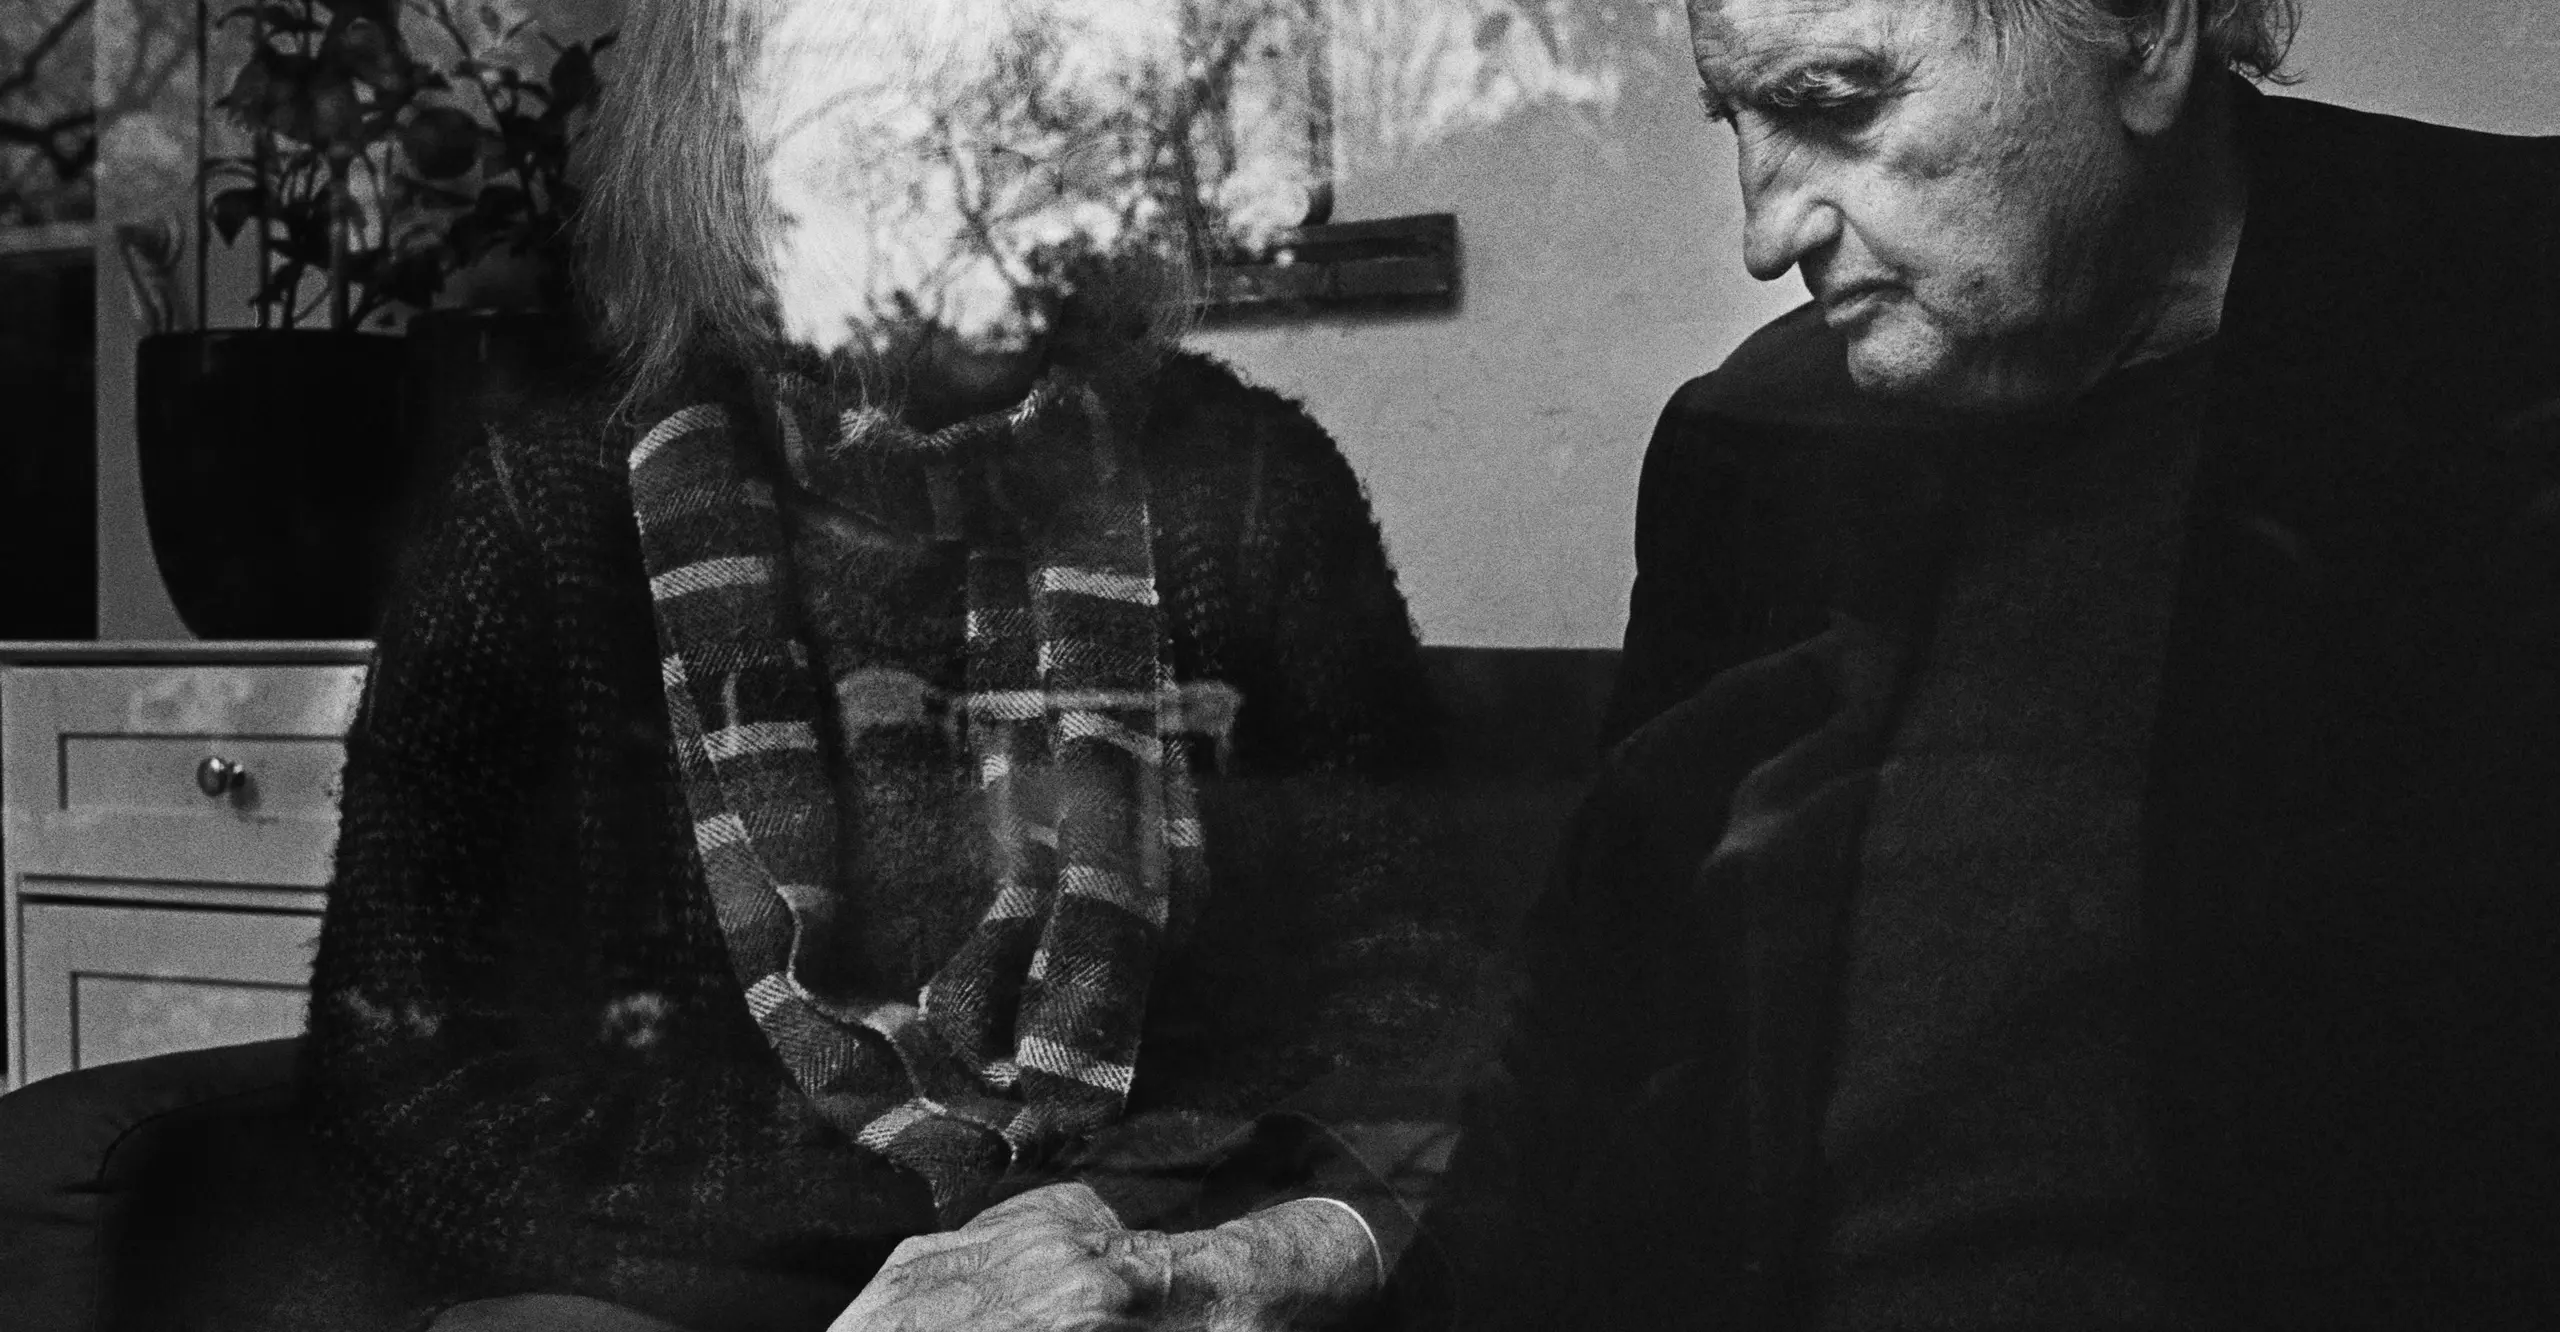 Black and white image featuring an older couple with the person on the right's face partially obscured by a reflection on glass. Man's hand is on the other person's knee.